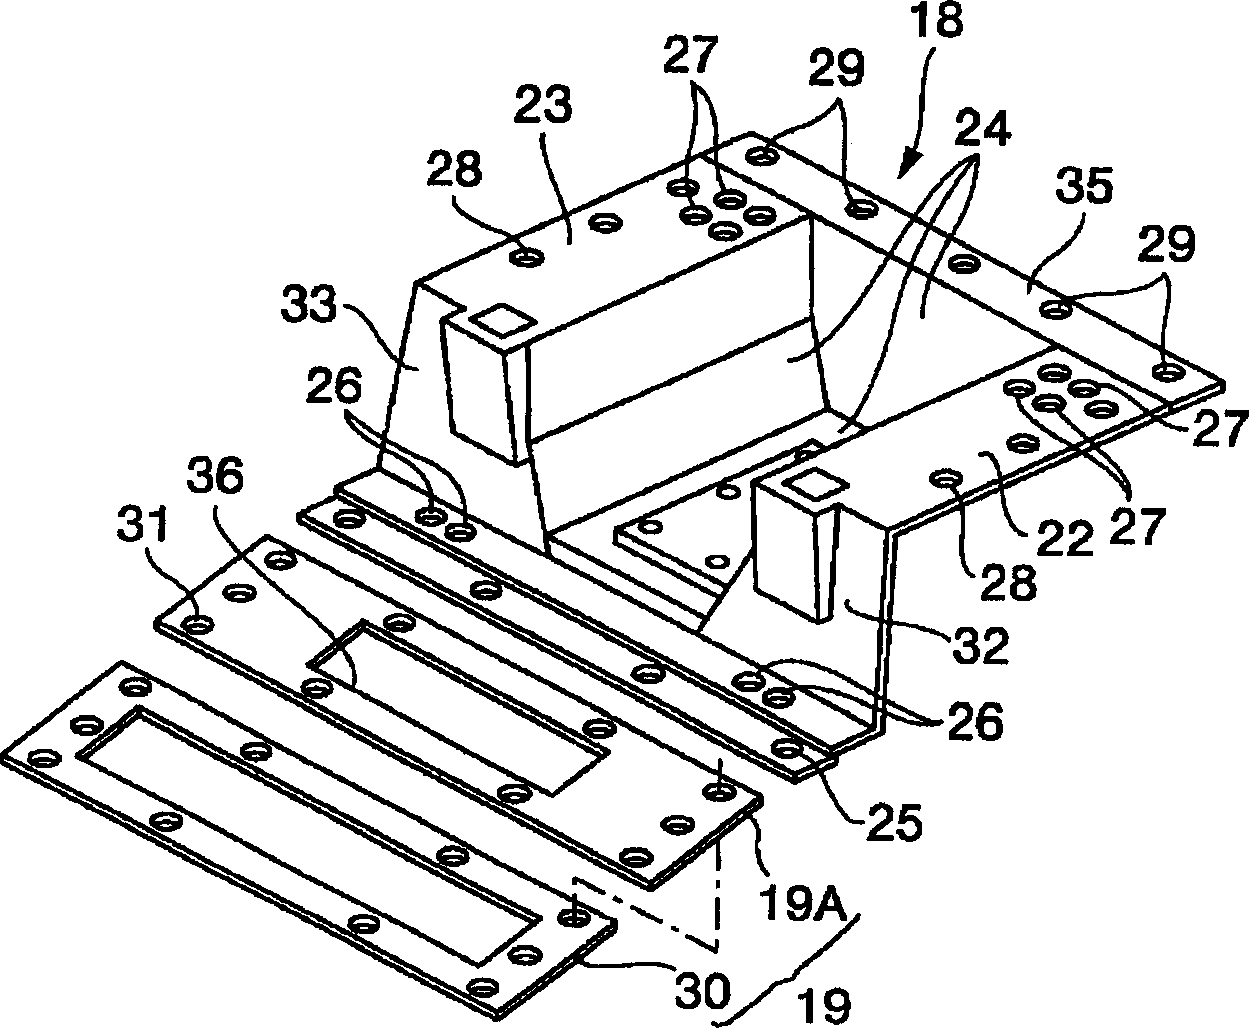 Baseplate frame of bulldozer and ROPS operator cabin for bulldozer with said baseplate frame